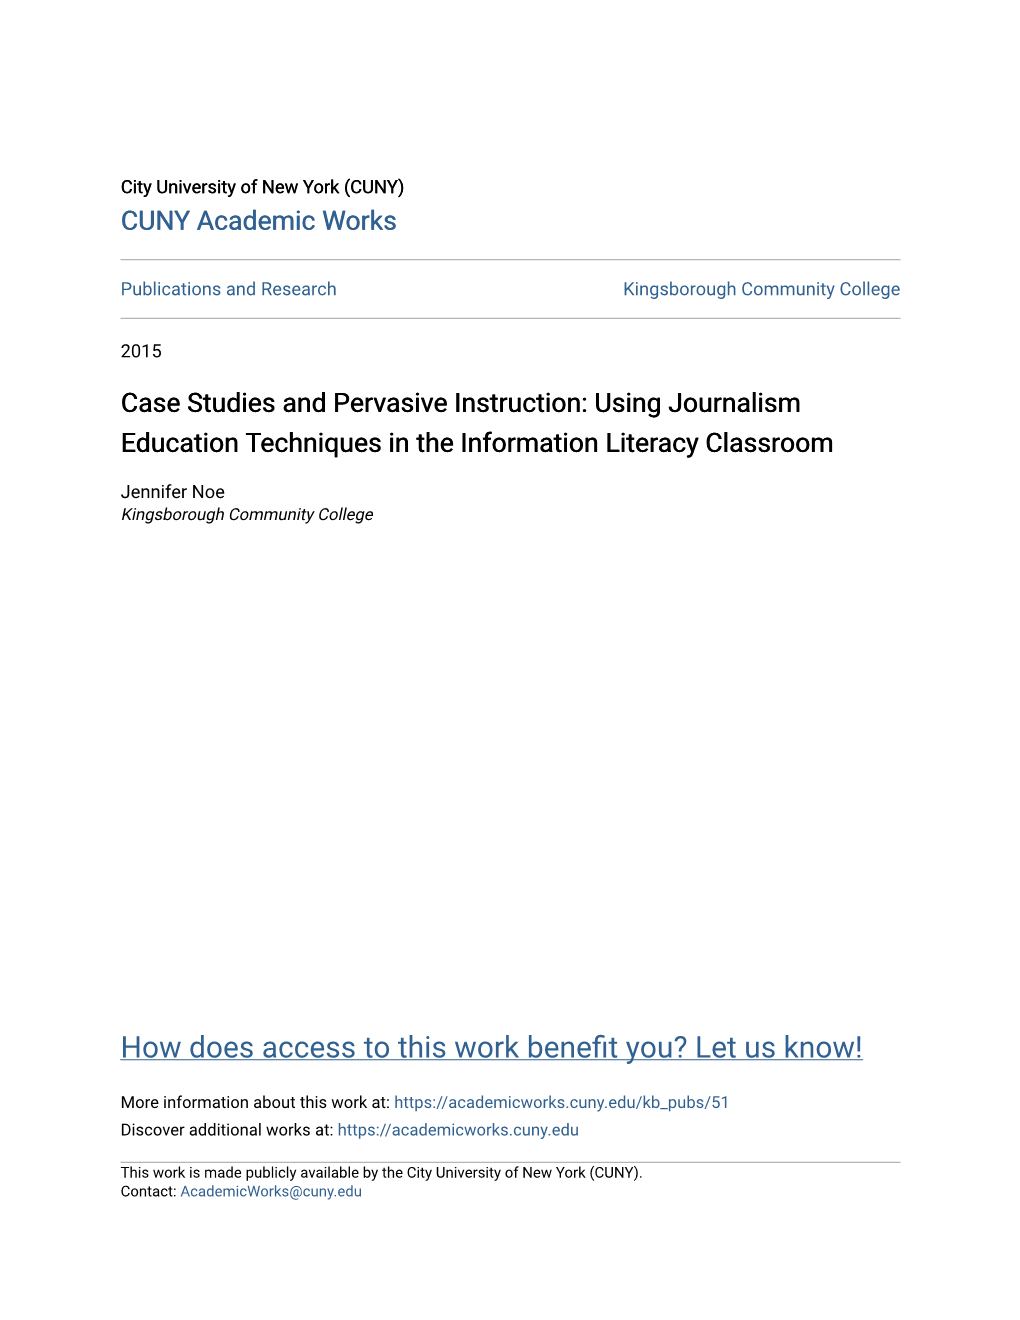 Using Journalism Education Techniques in the Information Literacy Classroom